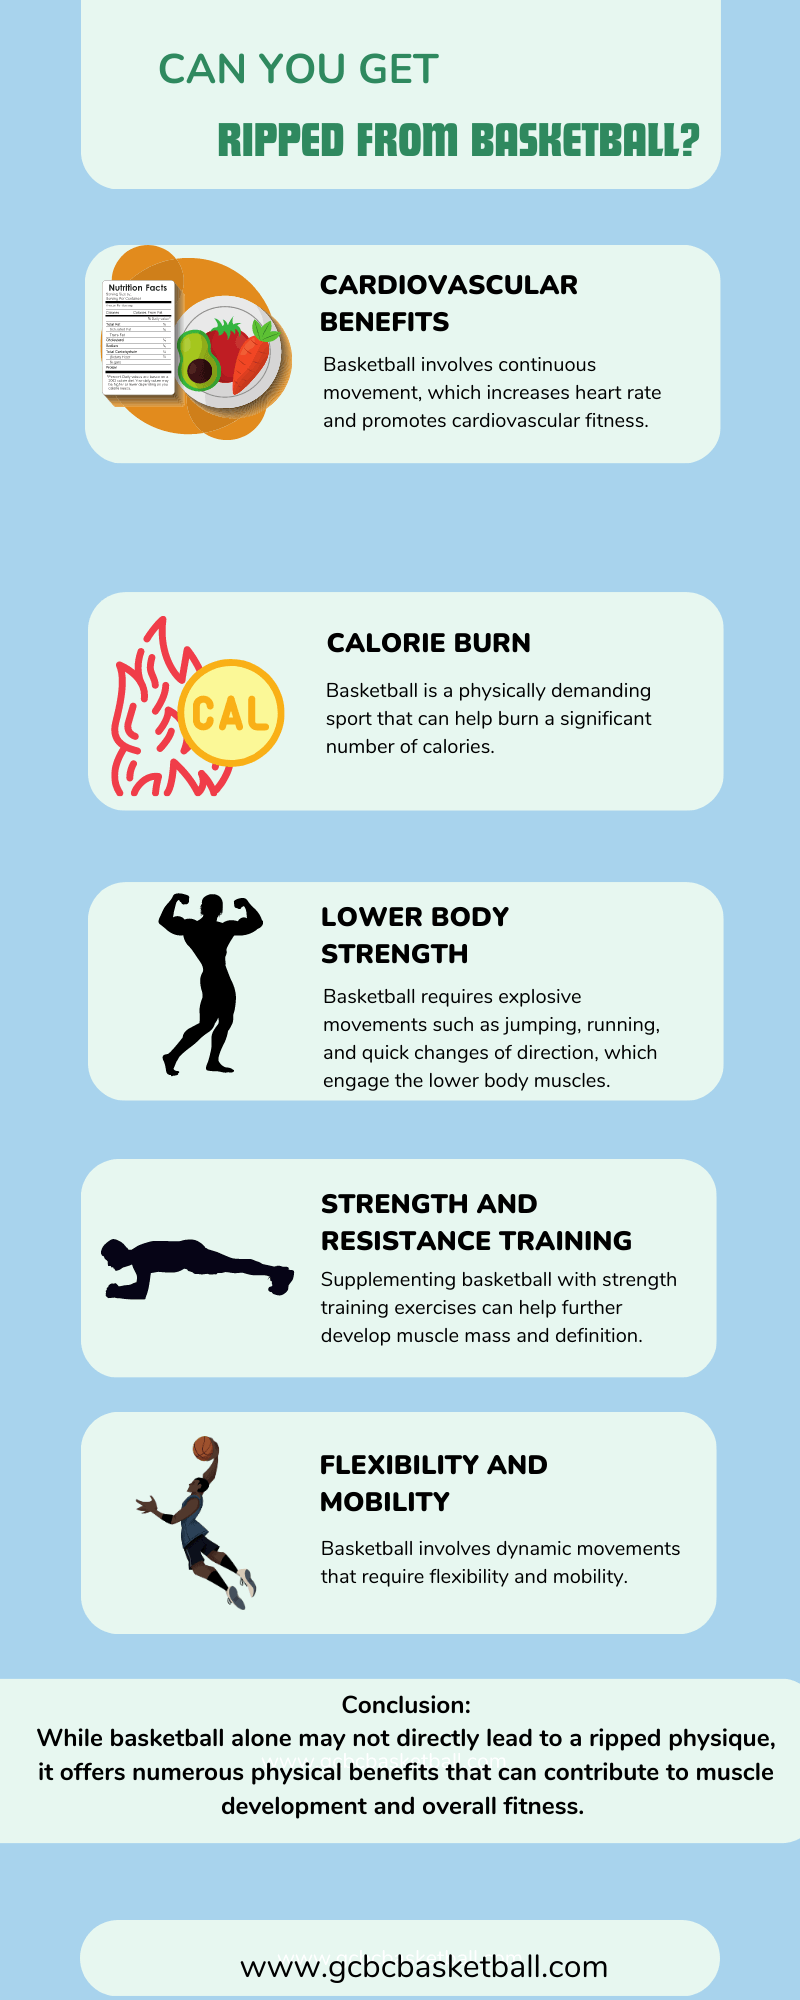 How Can You Get Ripped from Basketball-Infographic